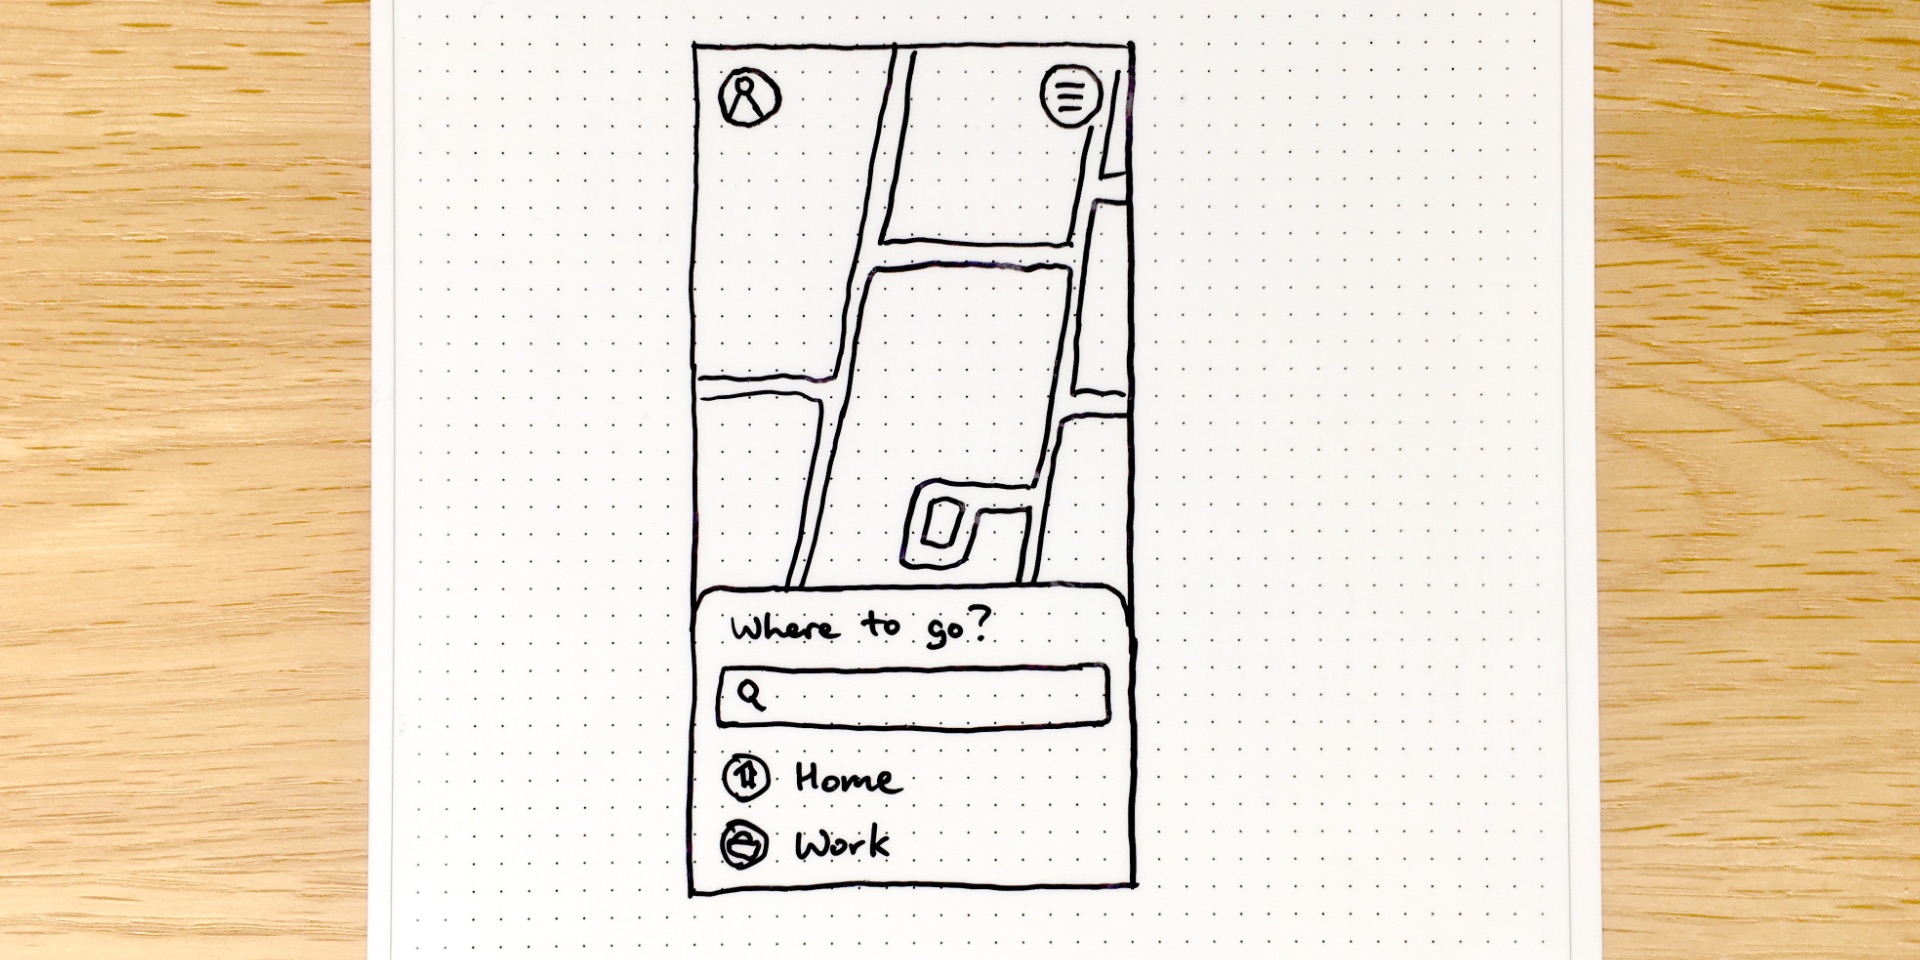 Wireframe concept for the home screen of the ride sharing app